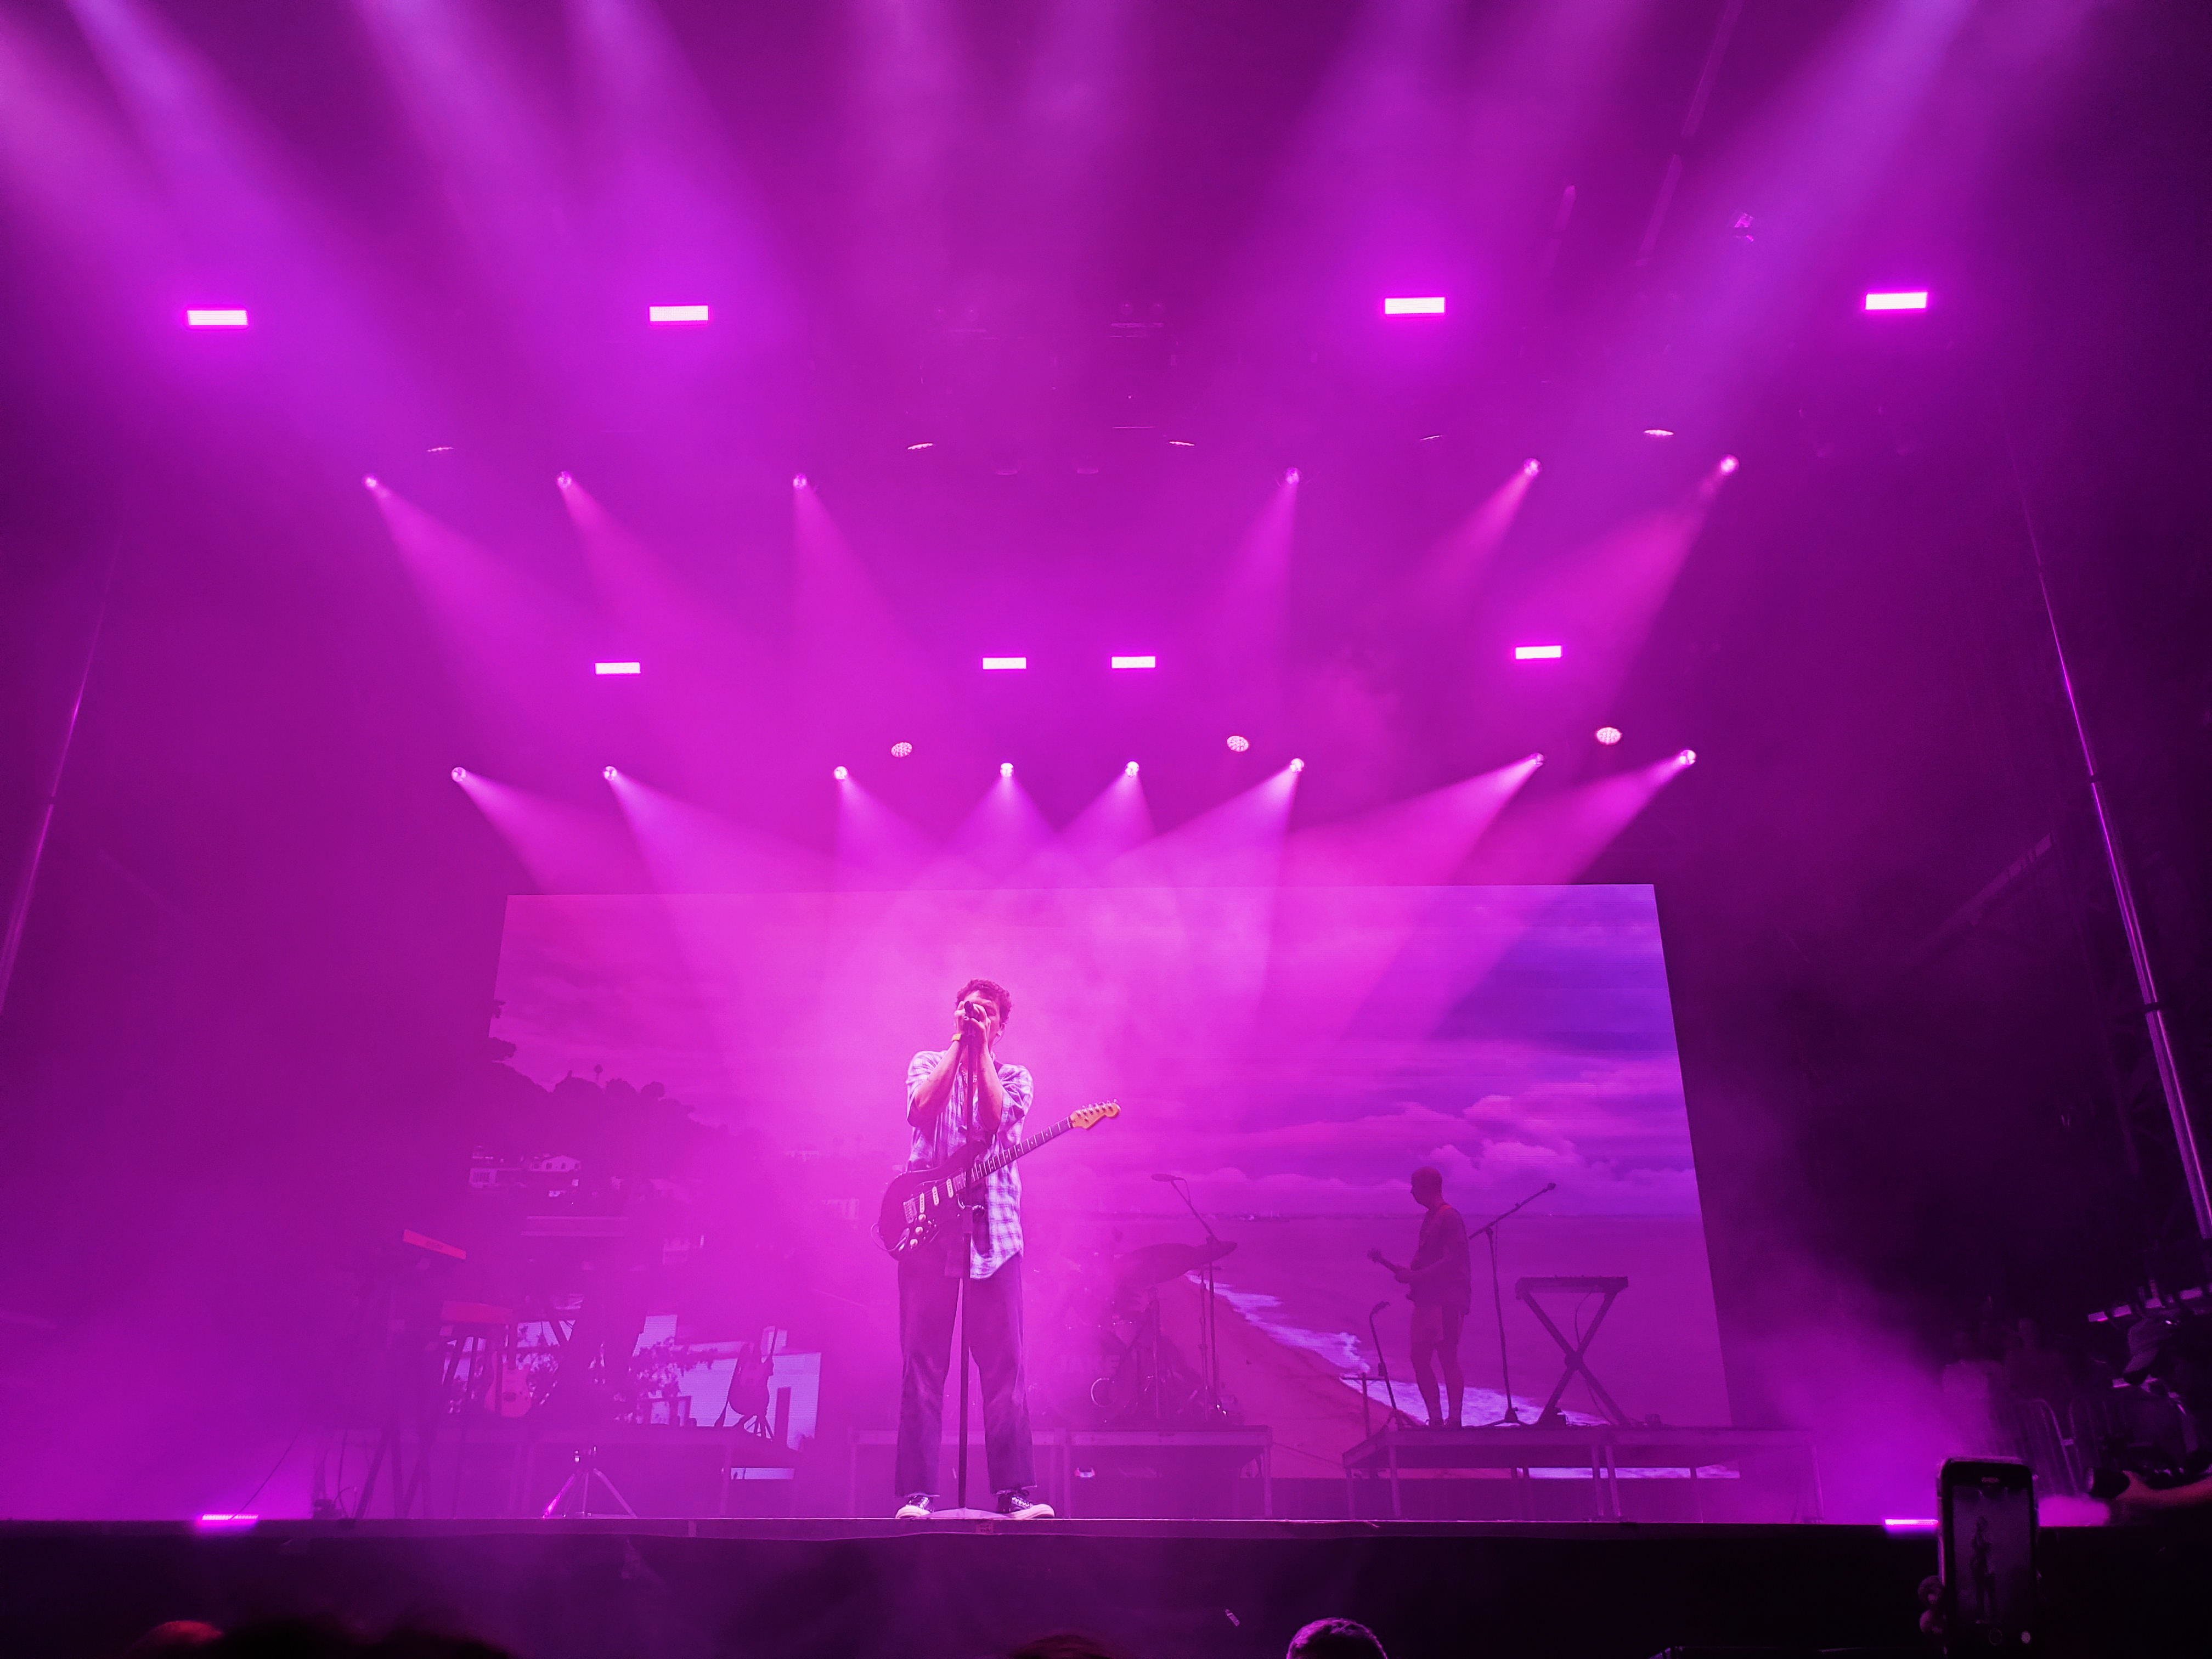 LANY performing at Austin City Limits. Paul Klein is in the center at the microphone. The background is a beach with a cloudy sky and the spotlights make the stage pink.